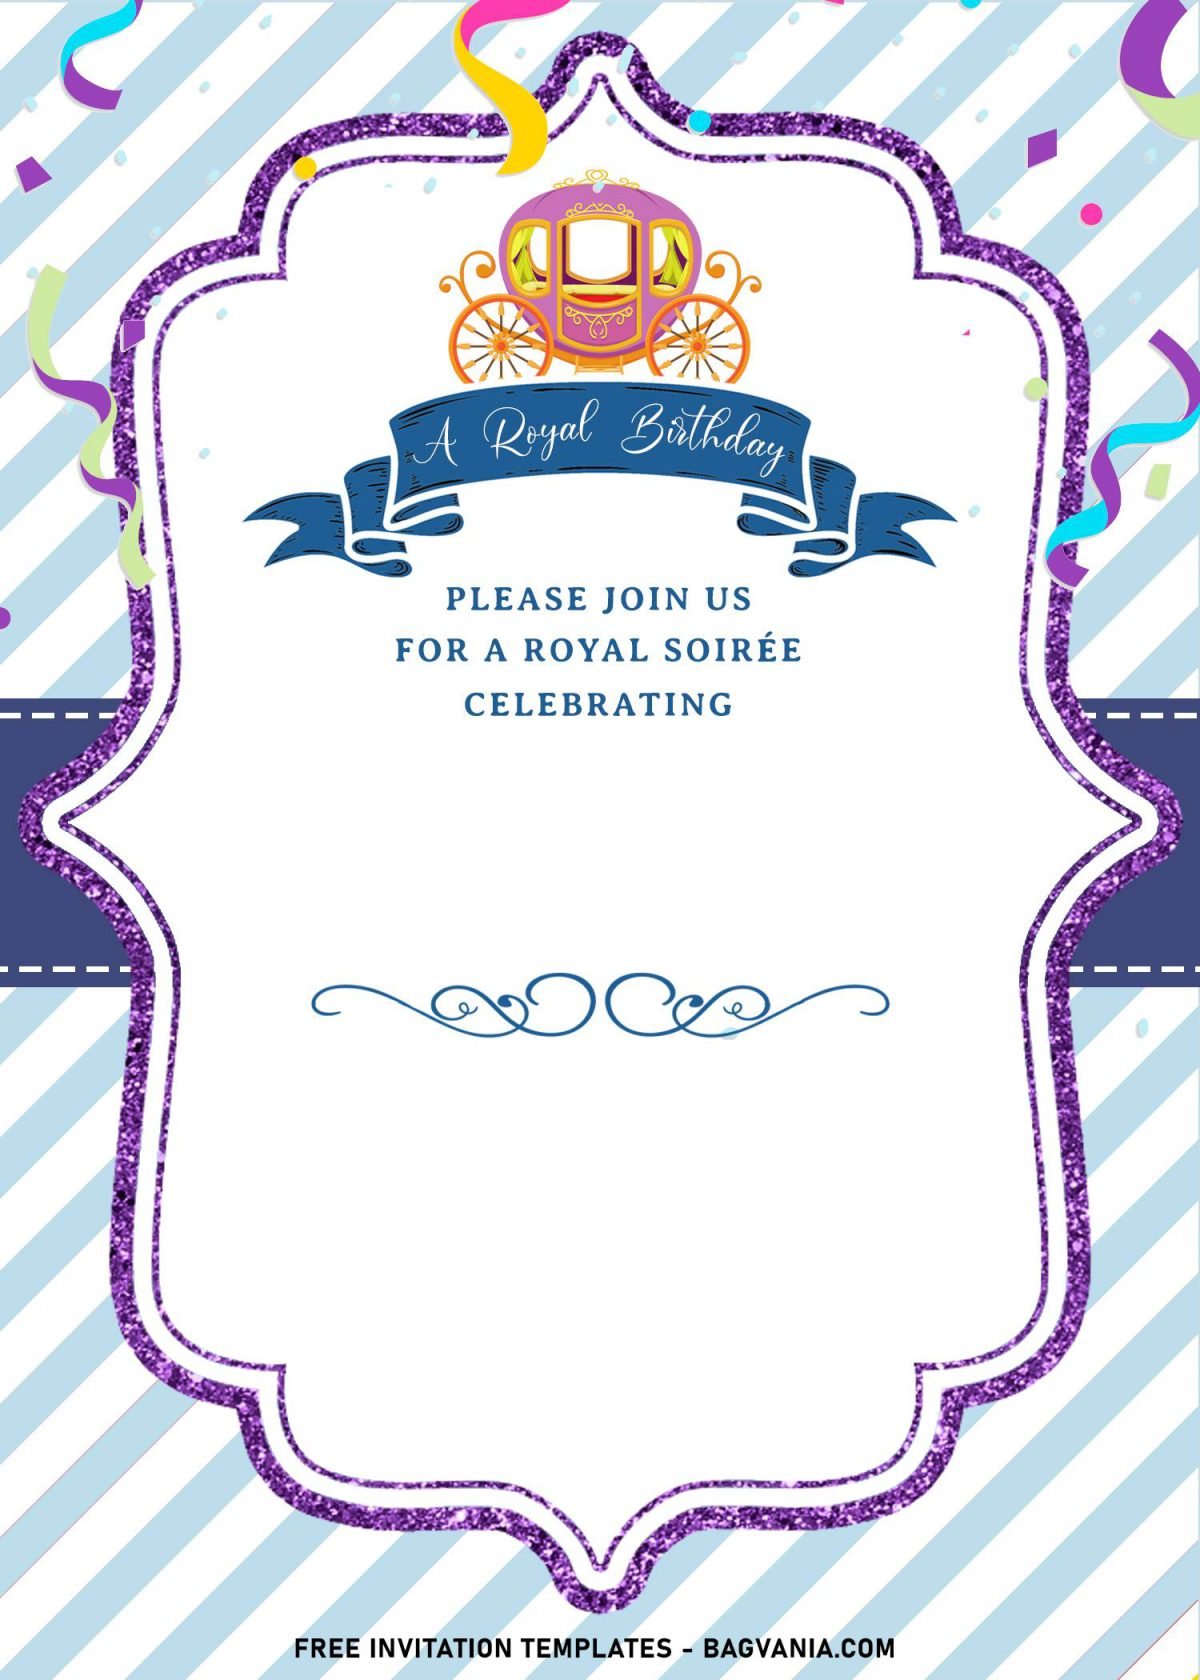 8+ Royal Birthday Invitation Templates For Your Kids Upcoming Birthday Party and has Colorful Confetti